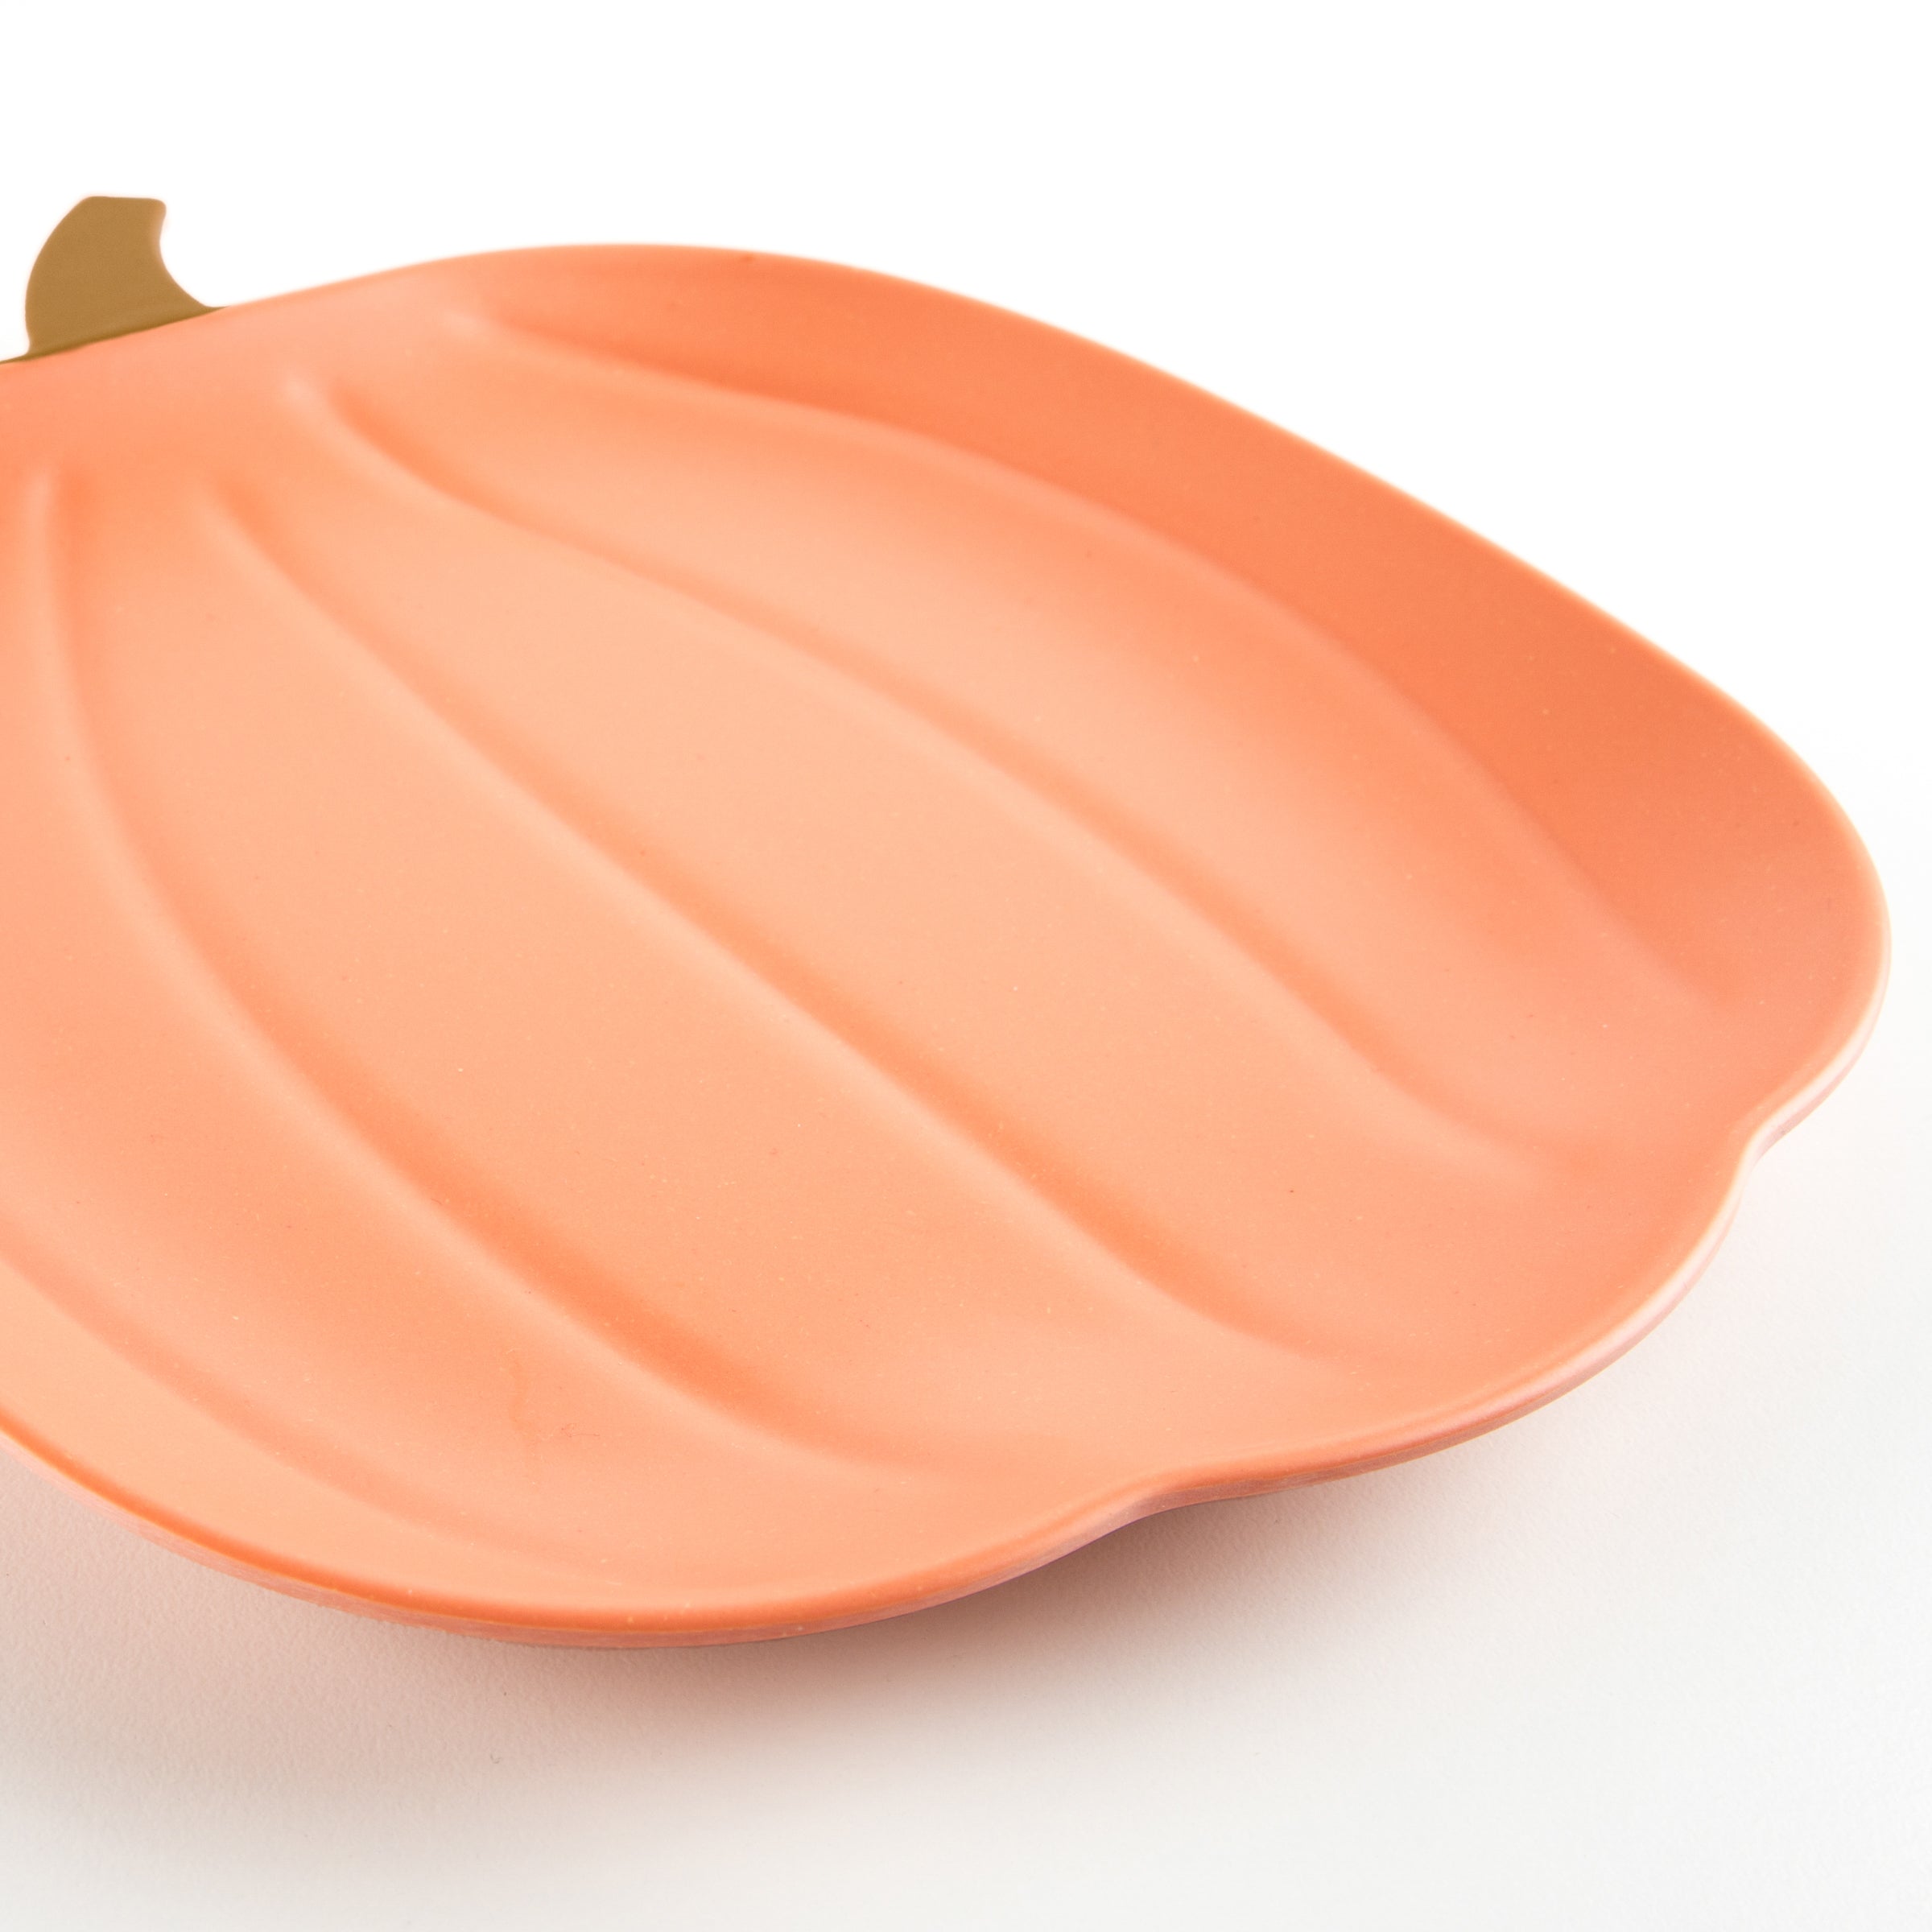 Our orange pumpkin plate is a bamboo plate that is reusable for many Halloween parties.